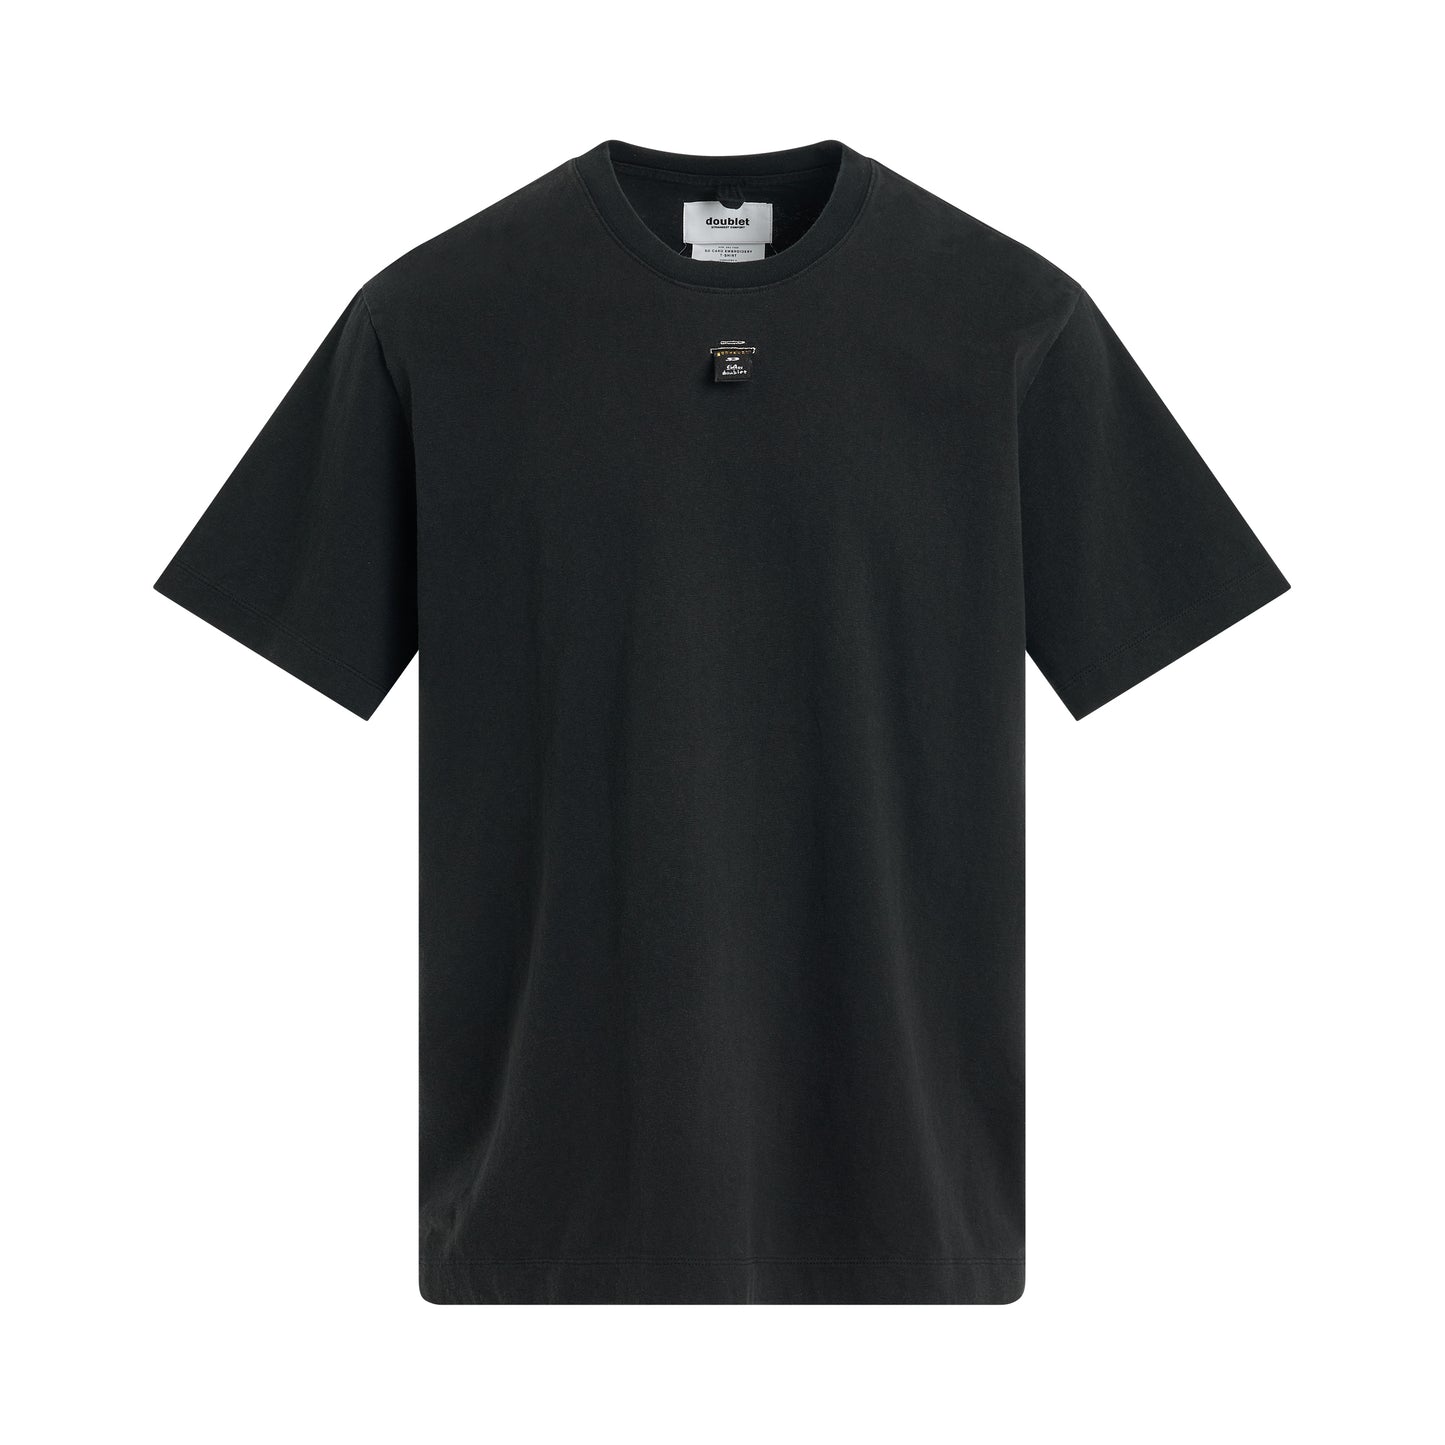 SD Card Embroidery T-Shirt in Black